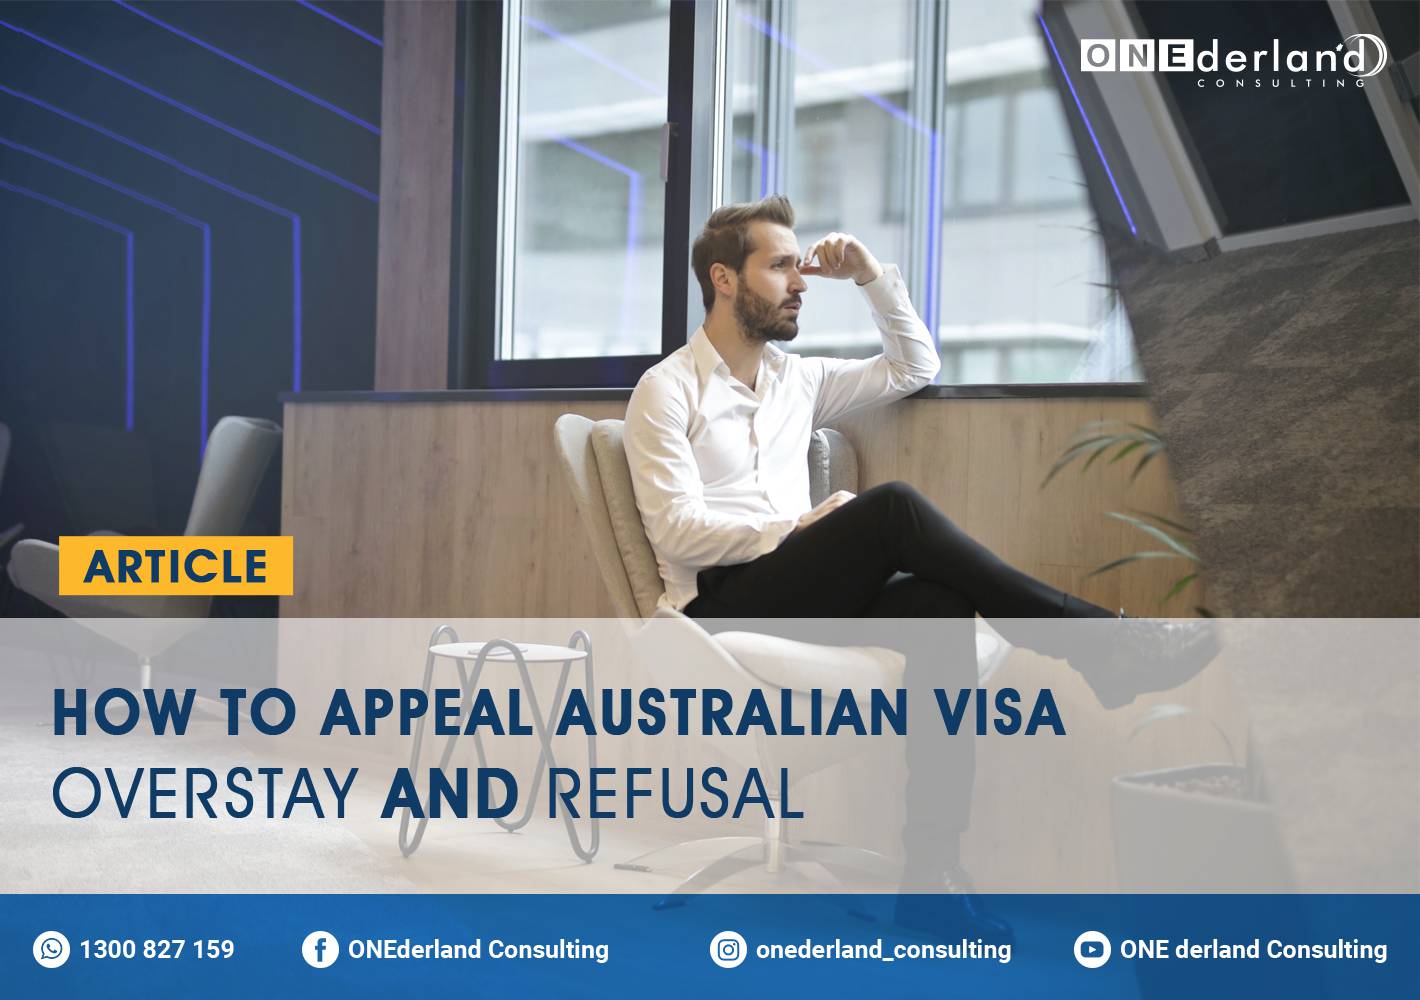 How To Appeal Australian Visa Overstay And Refusal